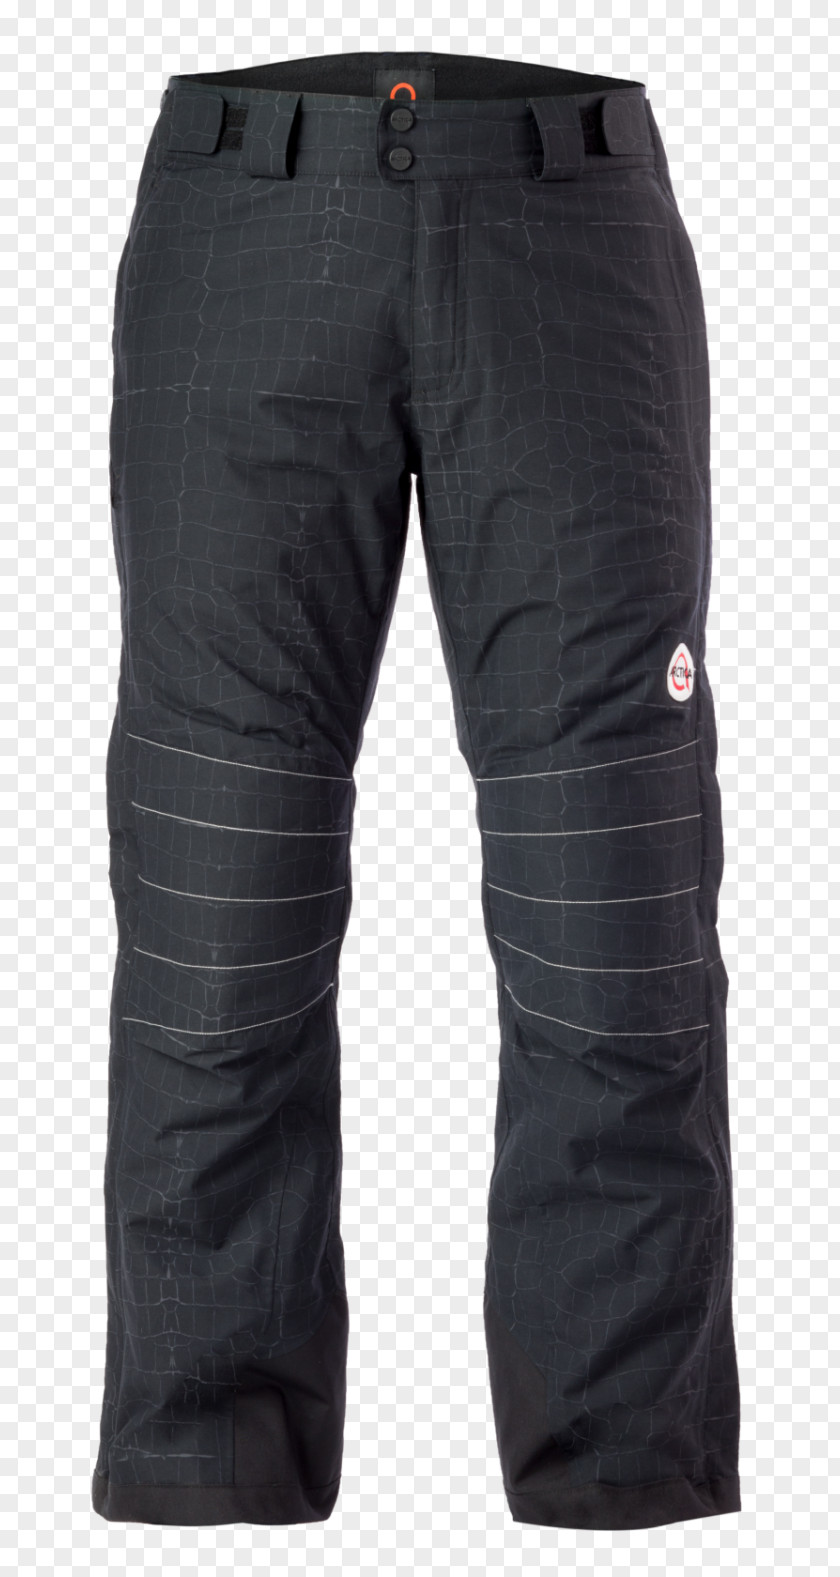 Jeans Pants Amazon.com Clothing Online Shopping PNG